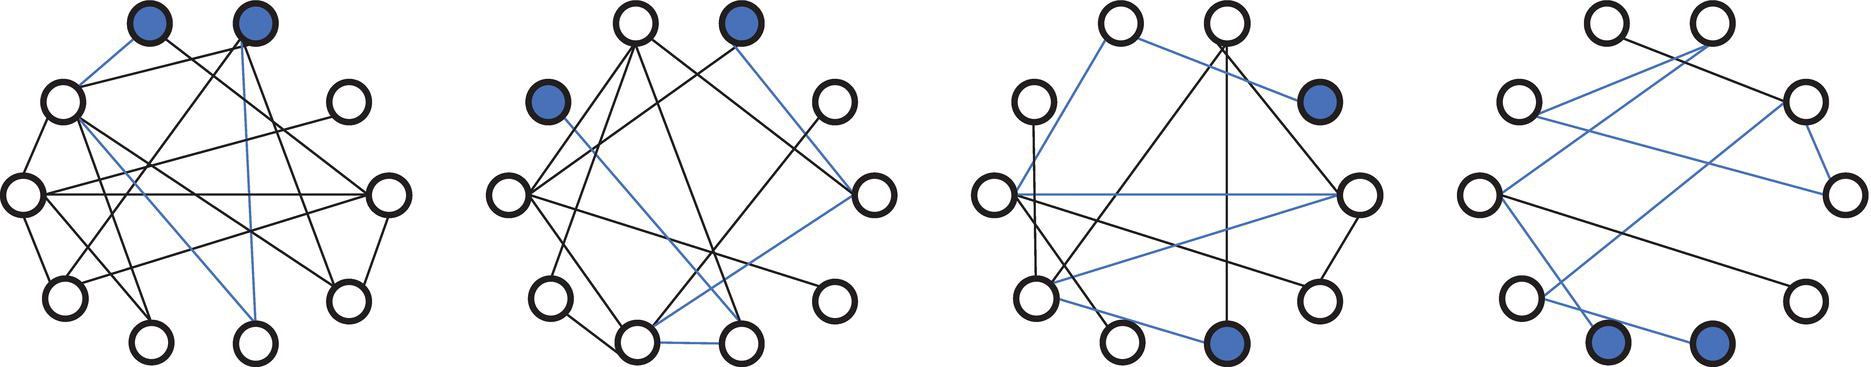 Schematic illustration of four graphs with same number of nodes and different number of links.